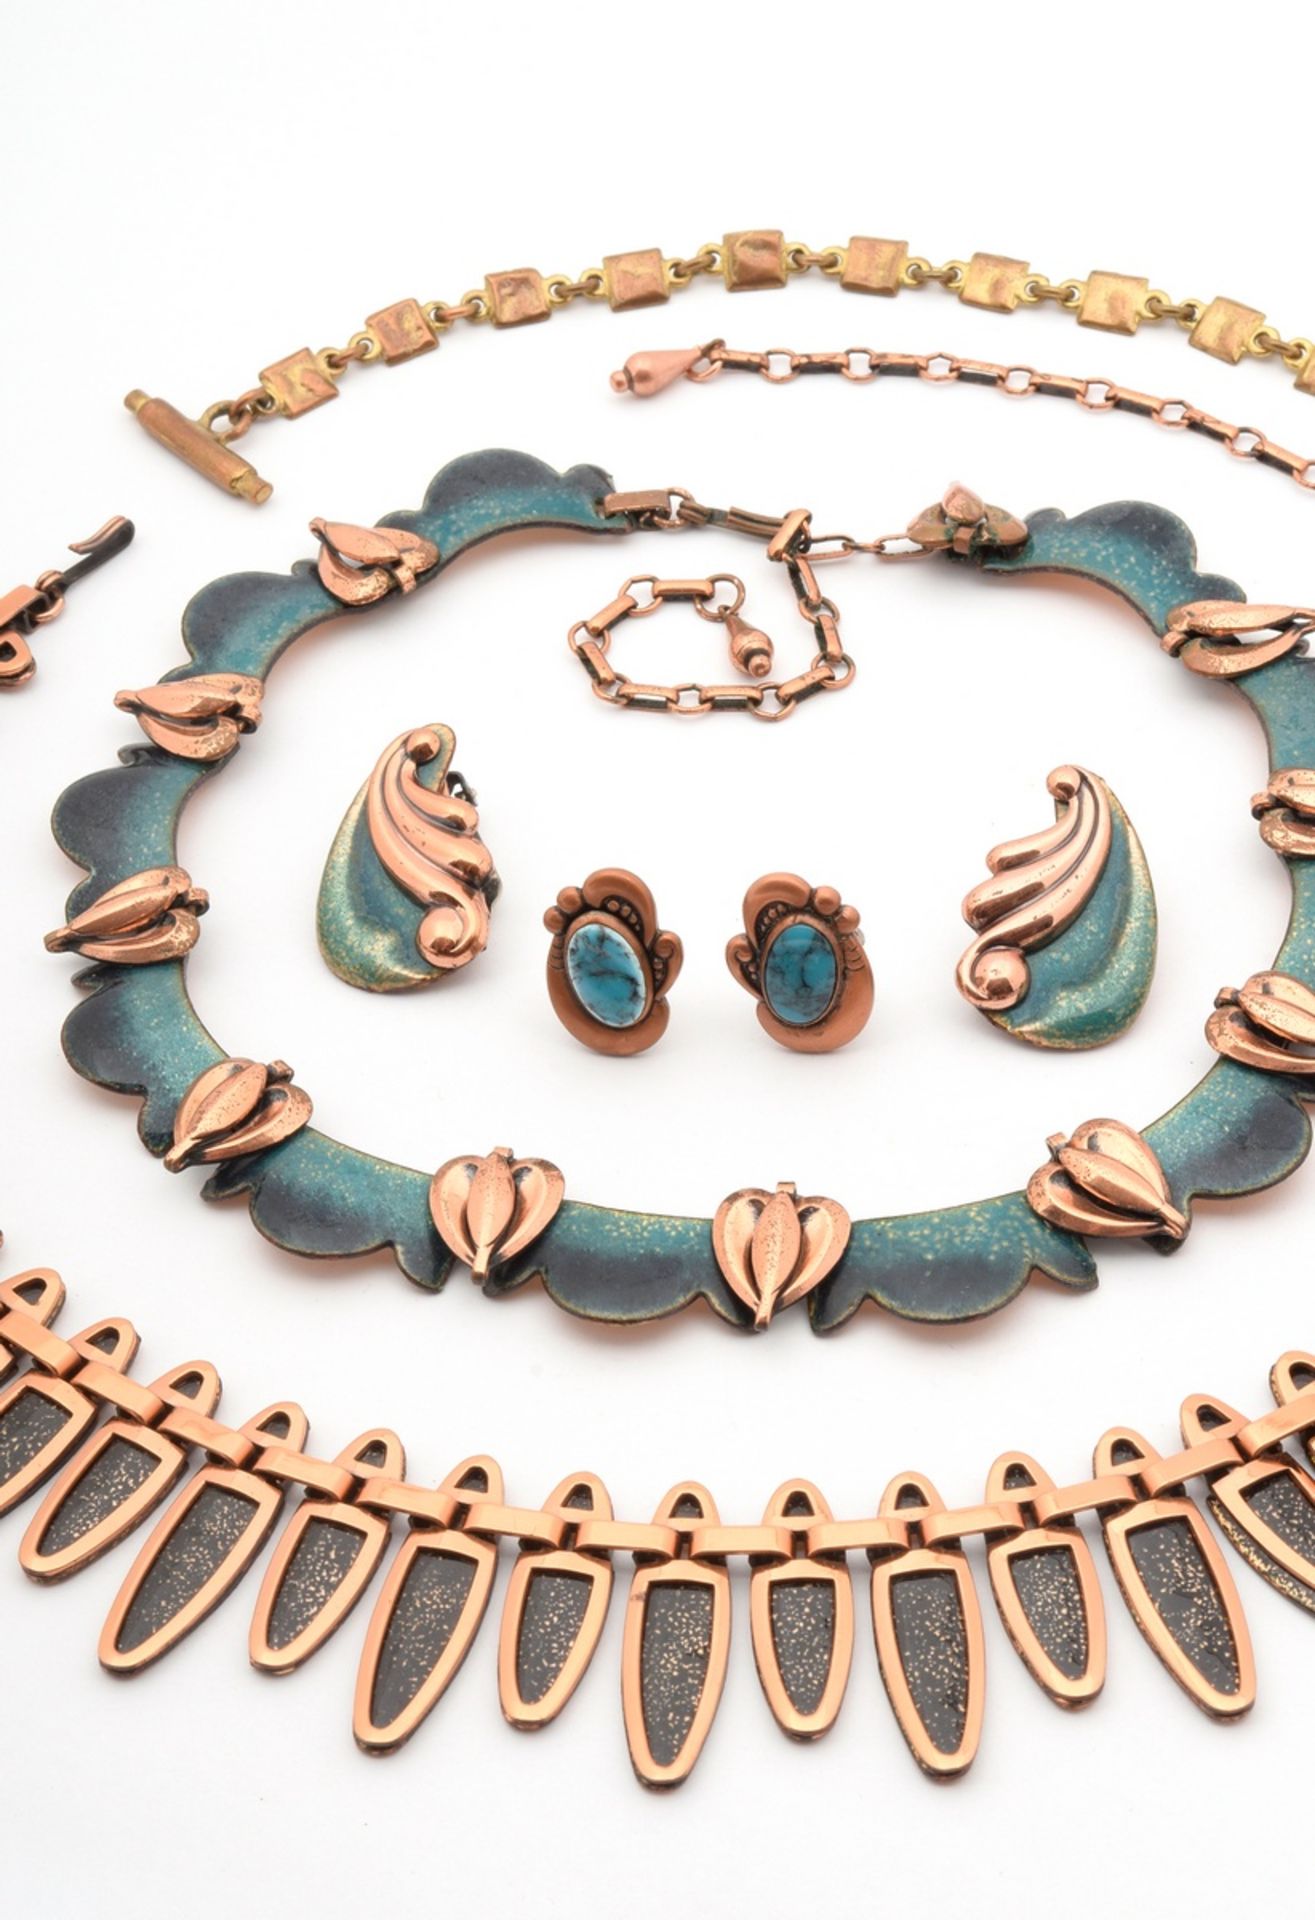 7 pieces of copper costume jewellery, partly enamelled, around 1960: set, signed "Matisse" = 1x nec